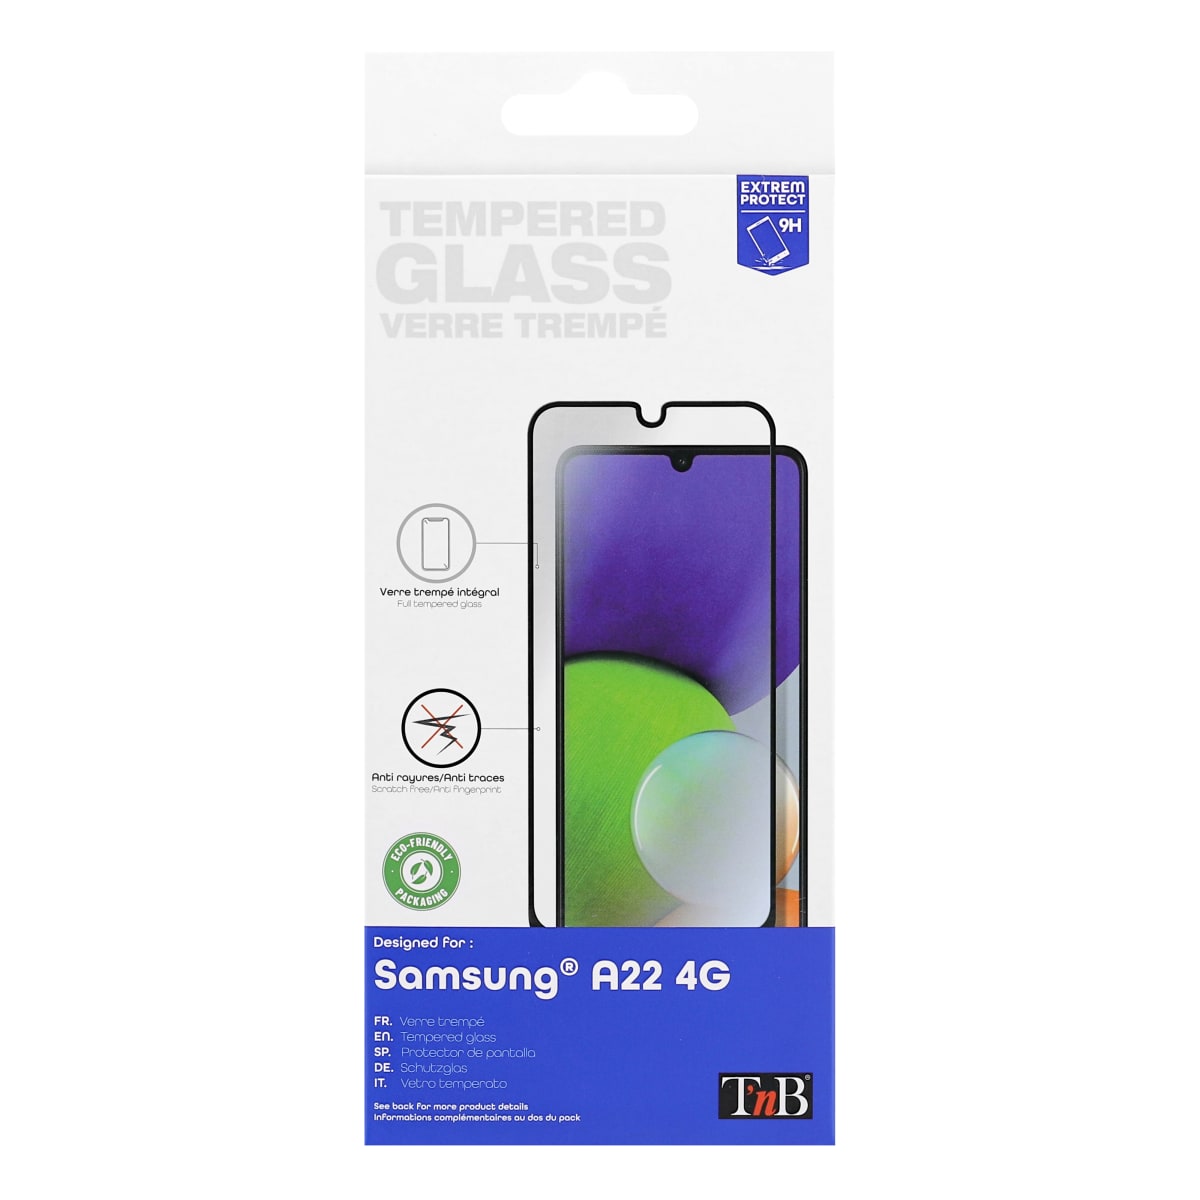 Tempered glass protection for Samsung Galaxy A22 4G - T'nB